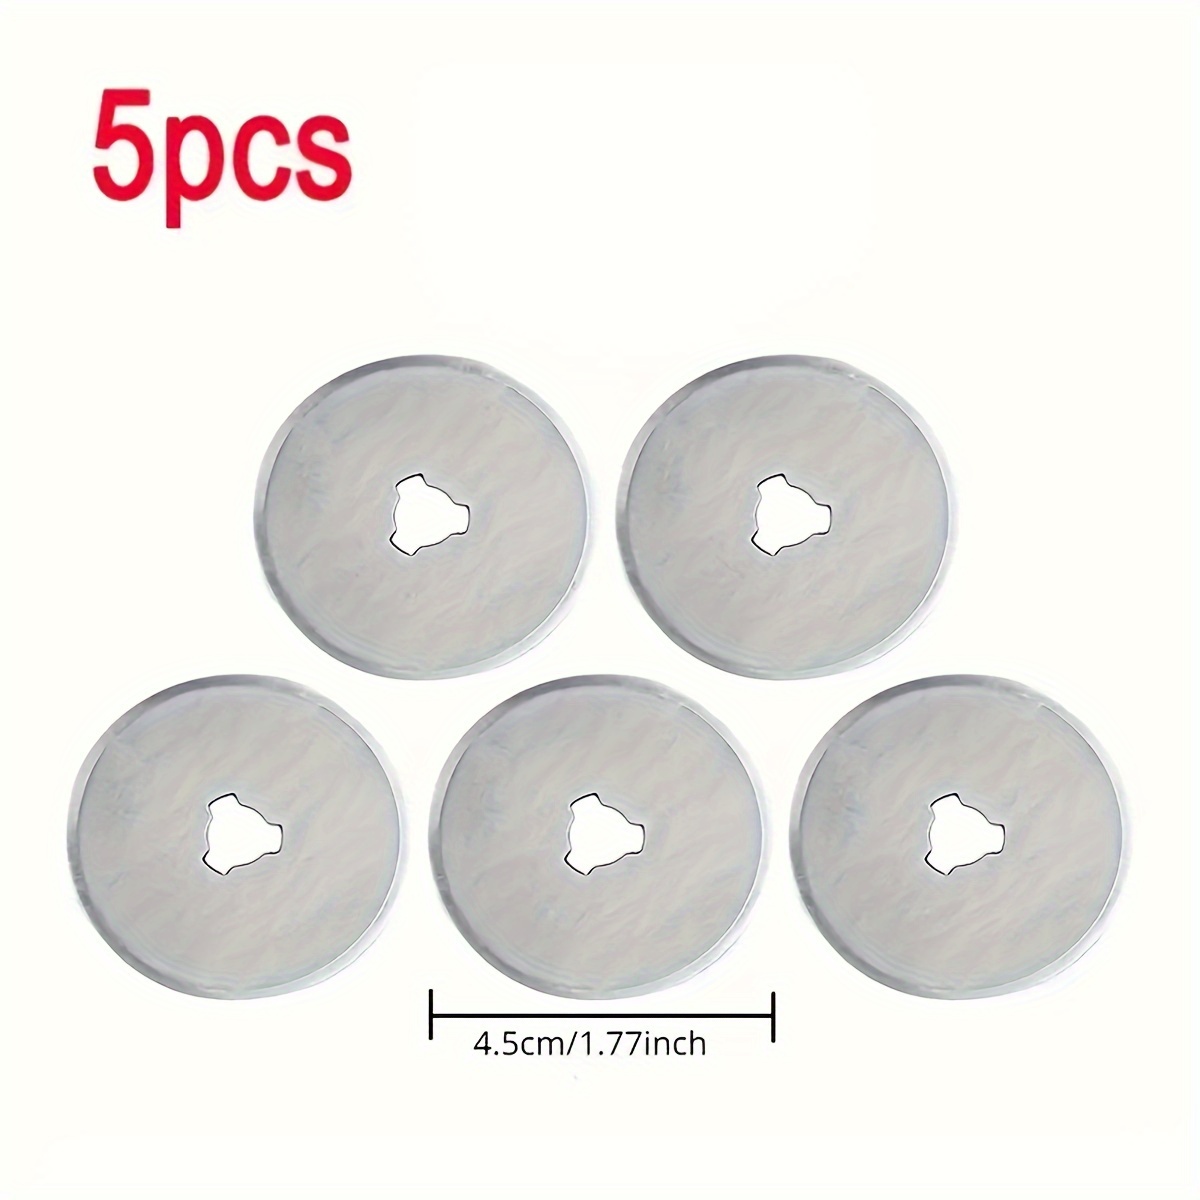 5PCS 28MM/45MM Rotary Cutter Blades Stainless Steel Replacement Blades for  DIY Quilting Patchwork Crafts Sewing Cutter Blades